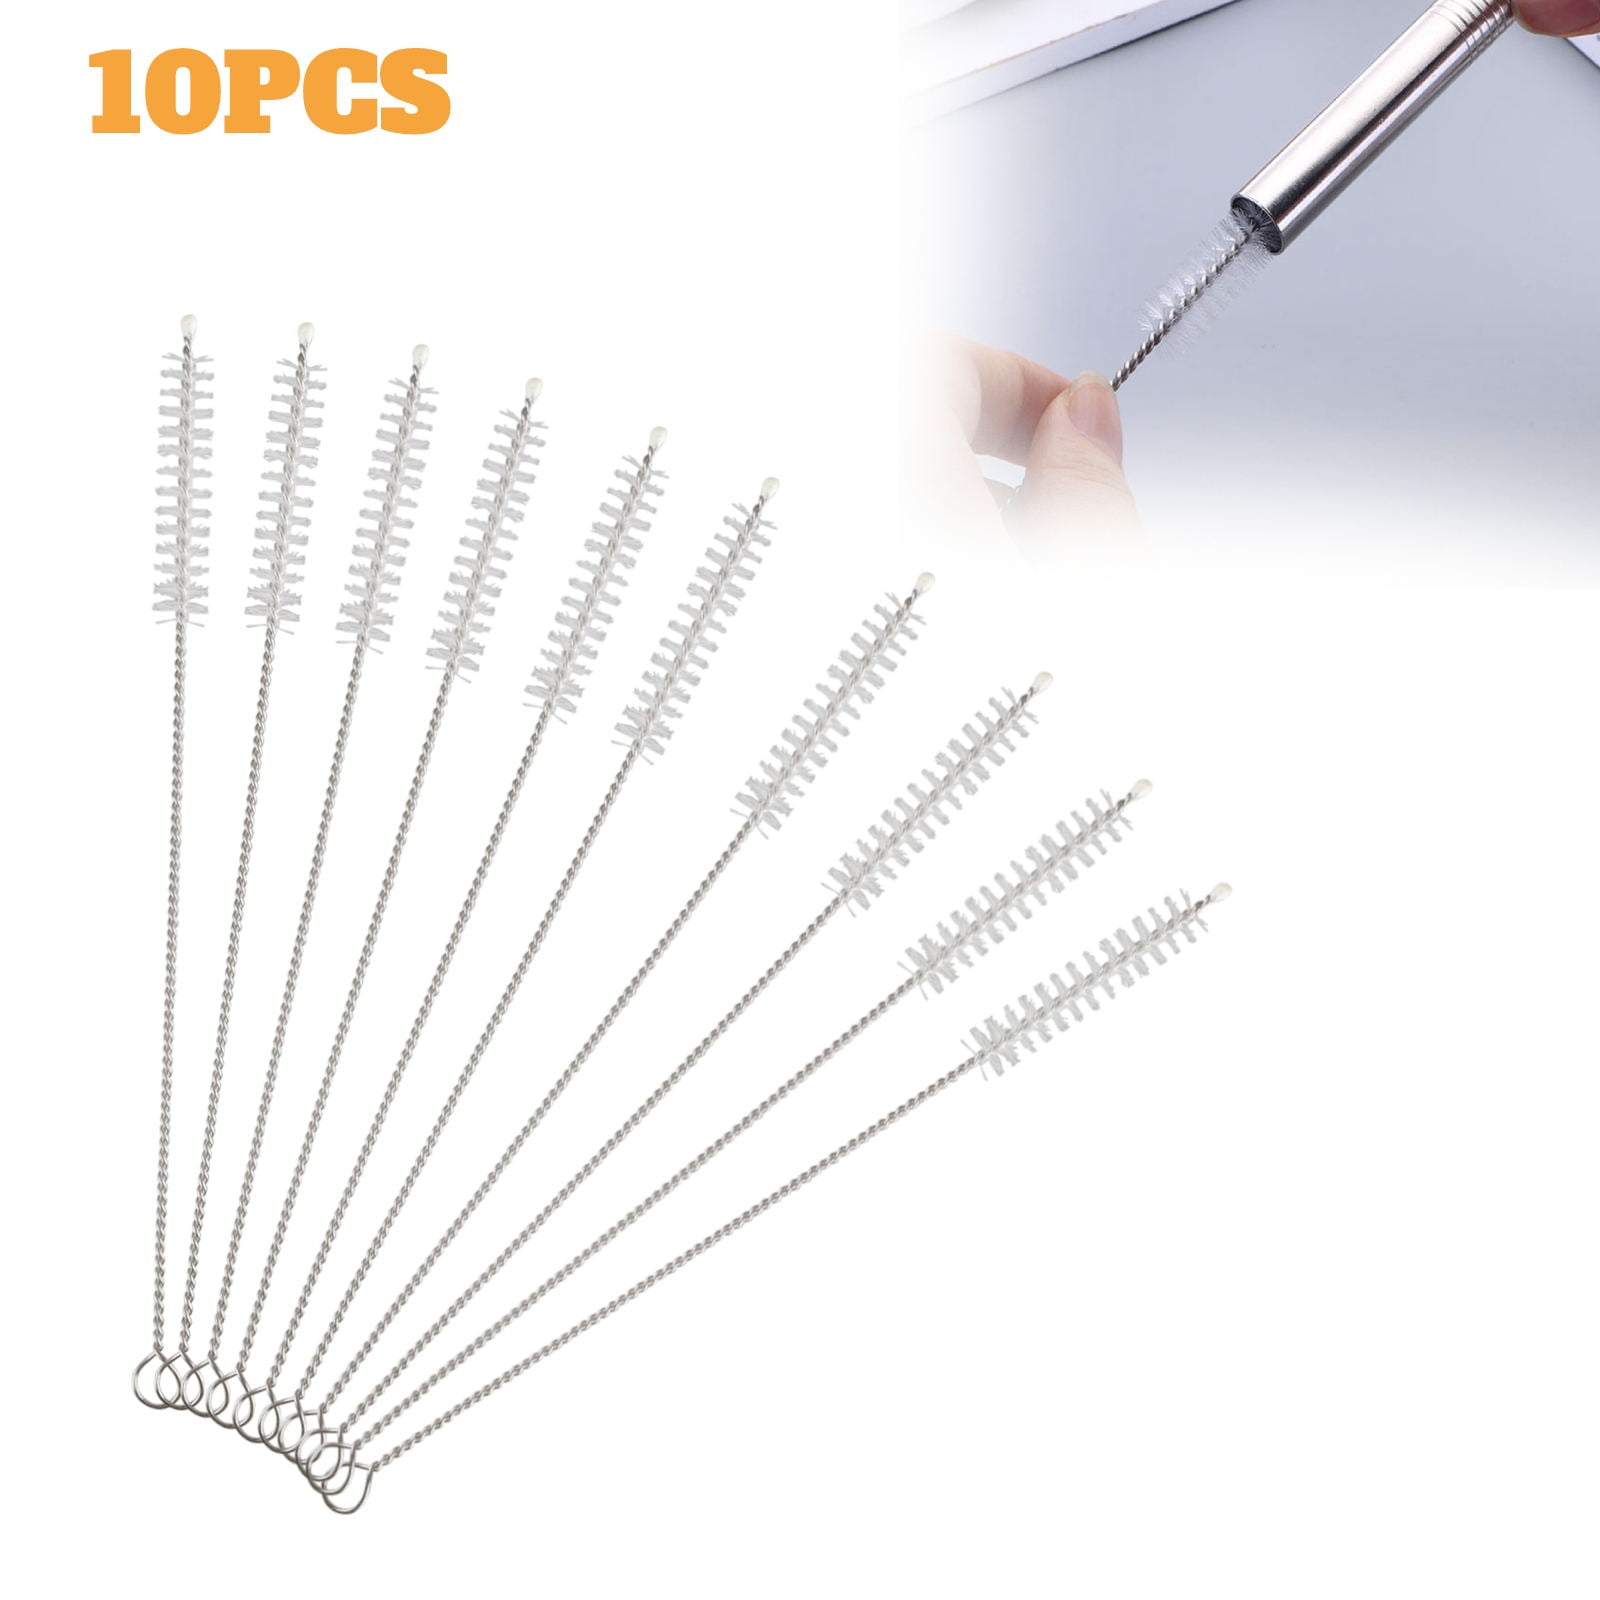 10-Pack Nylon Straw Cleaning Brushes - Durable Stainless Steel Drinking  Pipe Cleaners for Reusable Straws TIKA